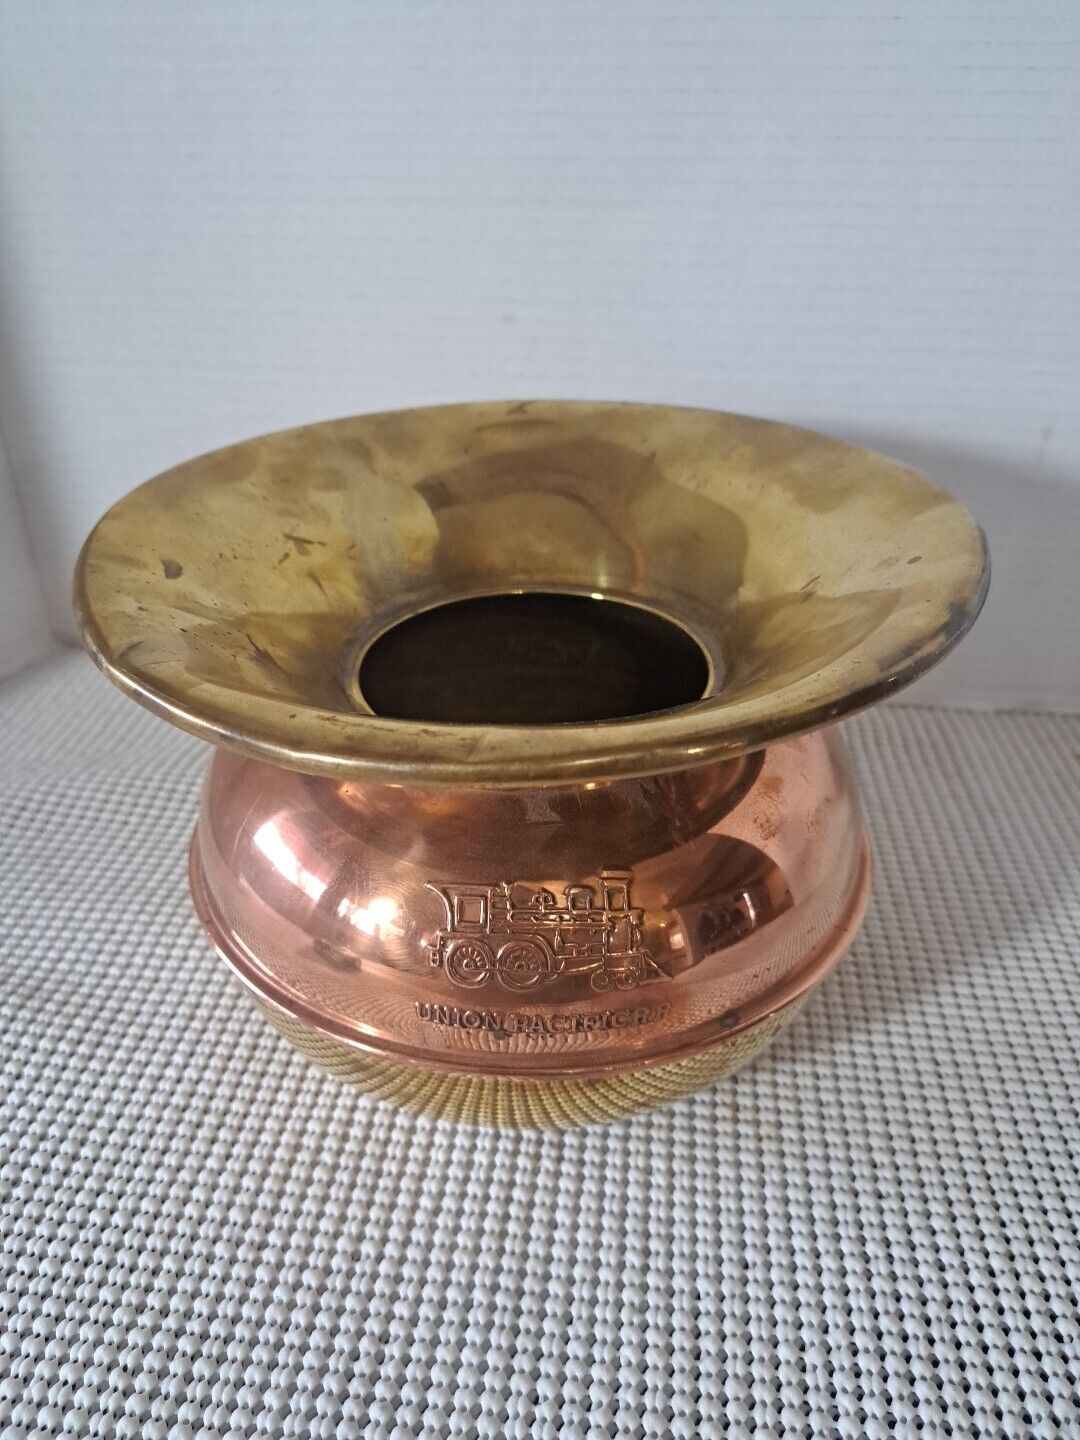 Vintage Union Pacific Railroad 8-Inch Spittoon Brass and Copper ( Hole In Bottom